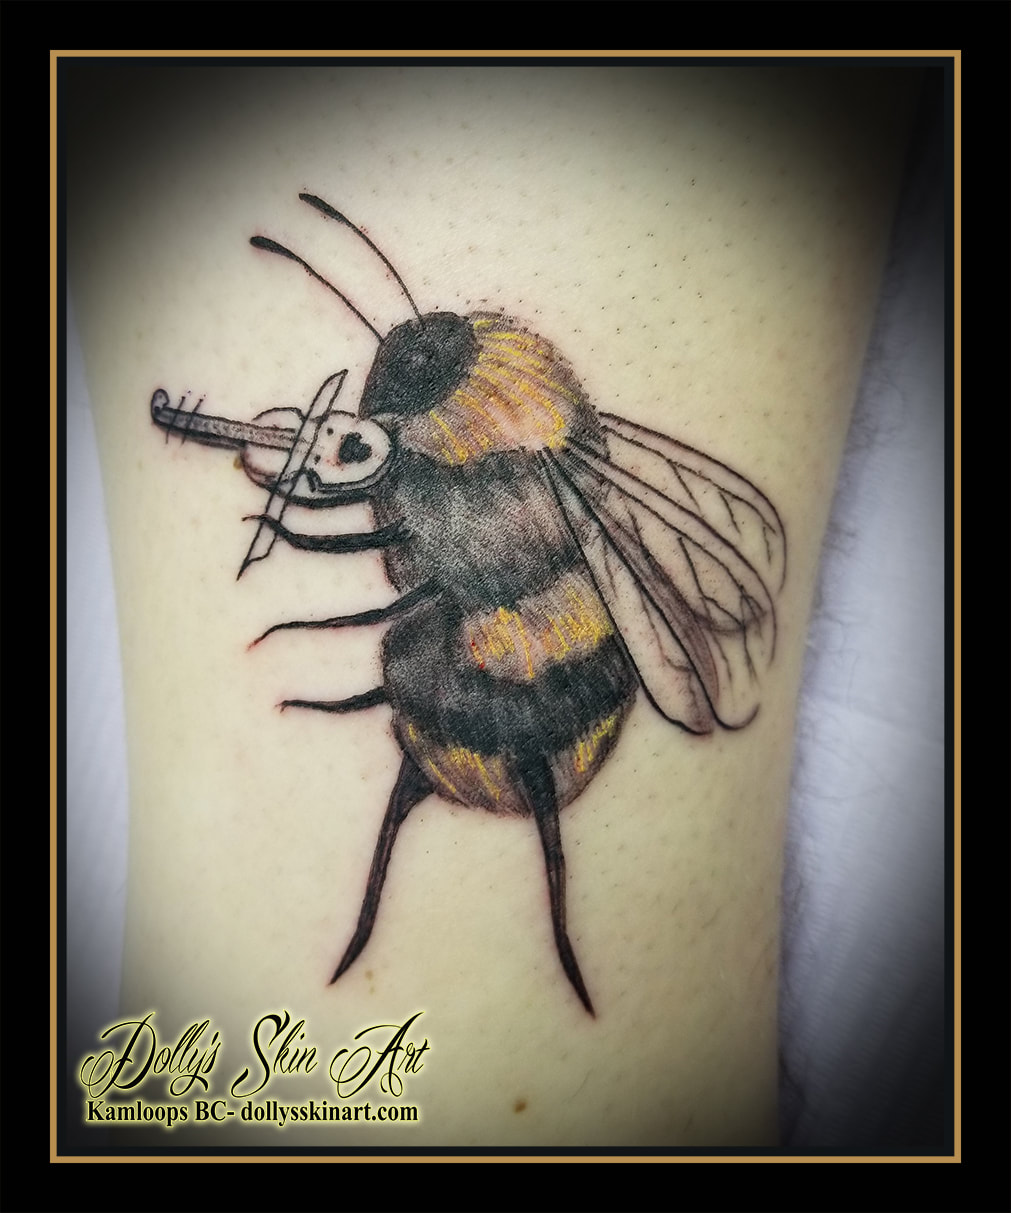 violin bee tattoo bumble bee fiddle small colour yellow black shading tattoo kamloops dolly's skin art